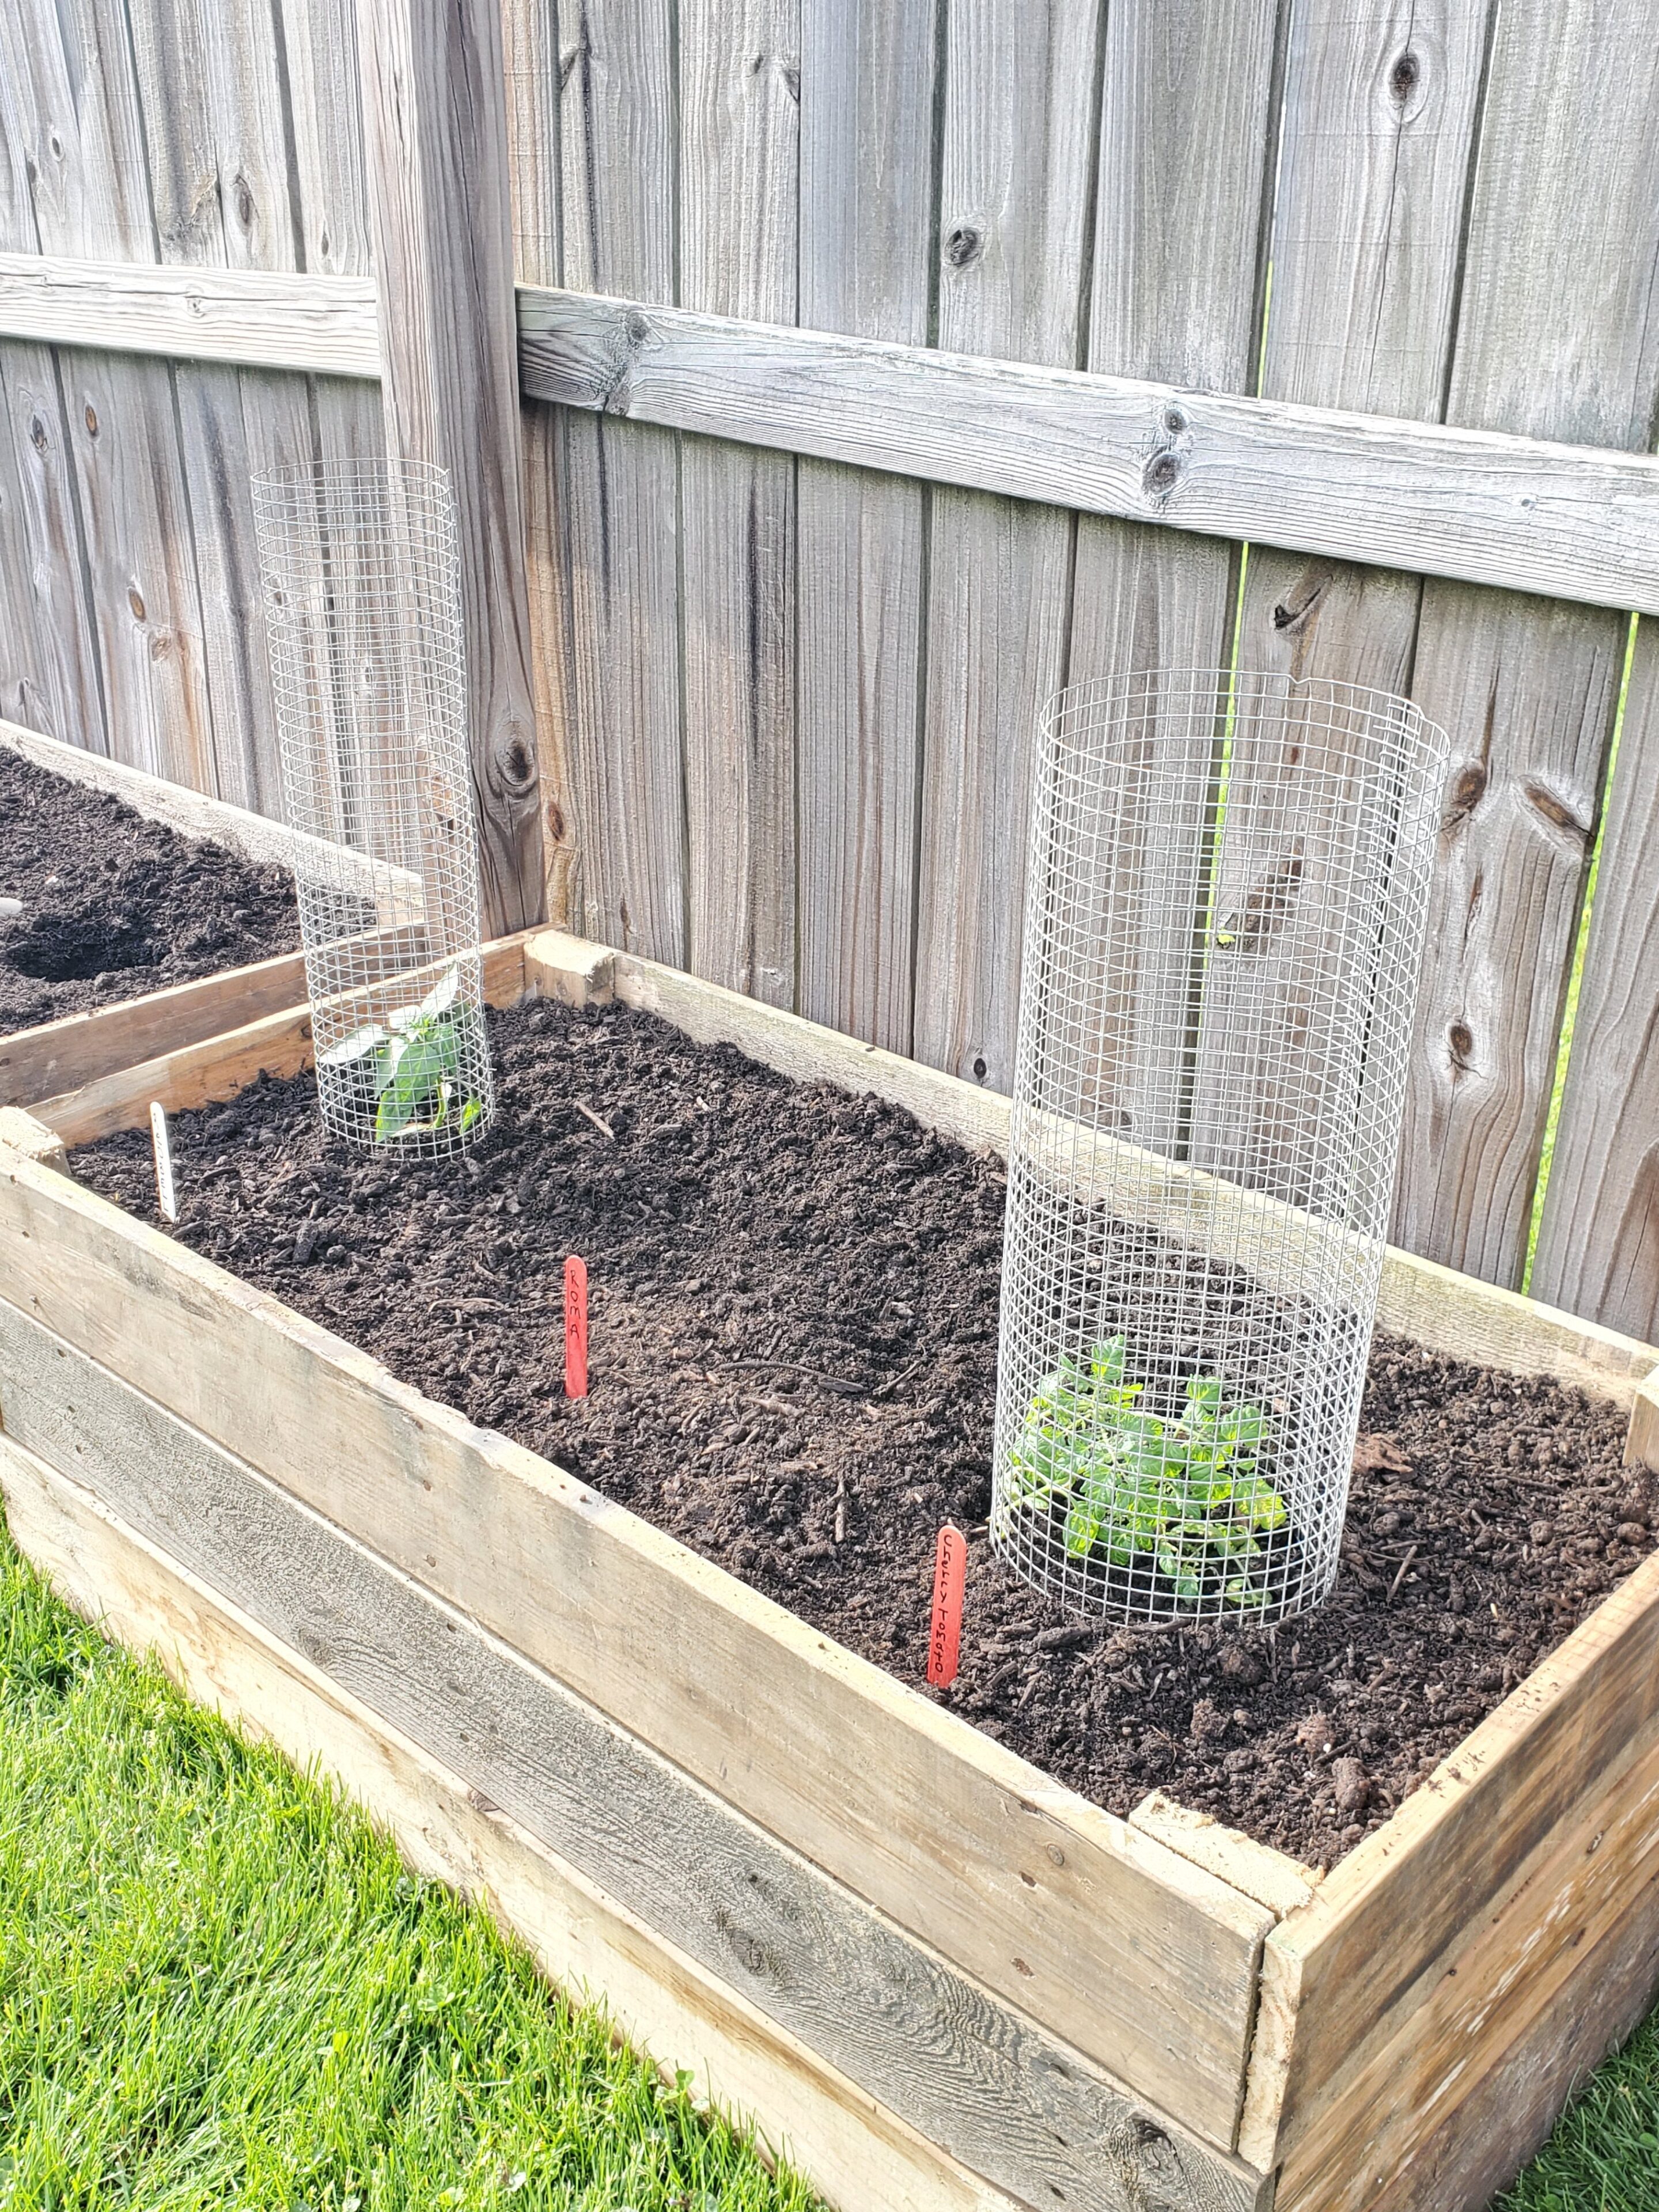 How To Build Raised Garden Beds From, How To Make A Raised Bed Garden With Pallets